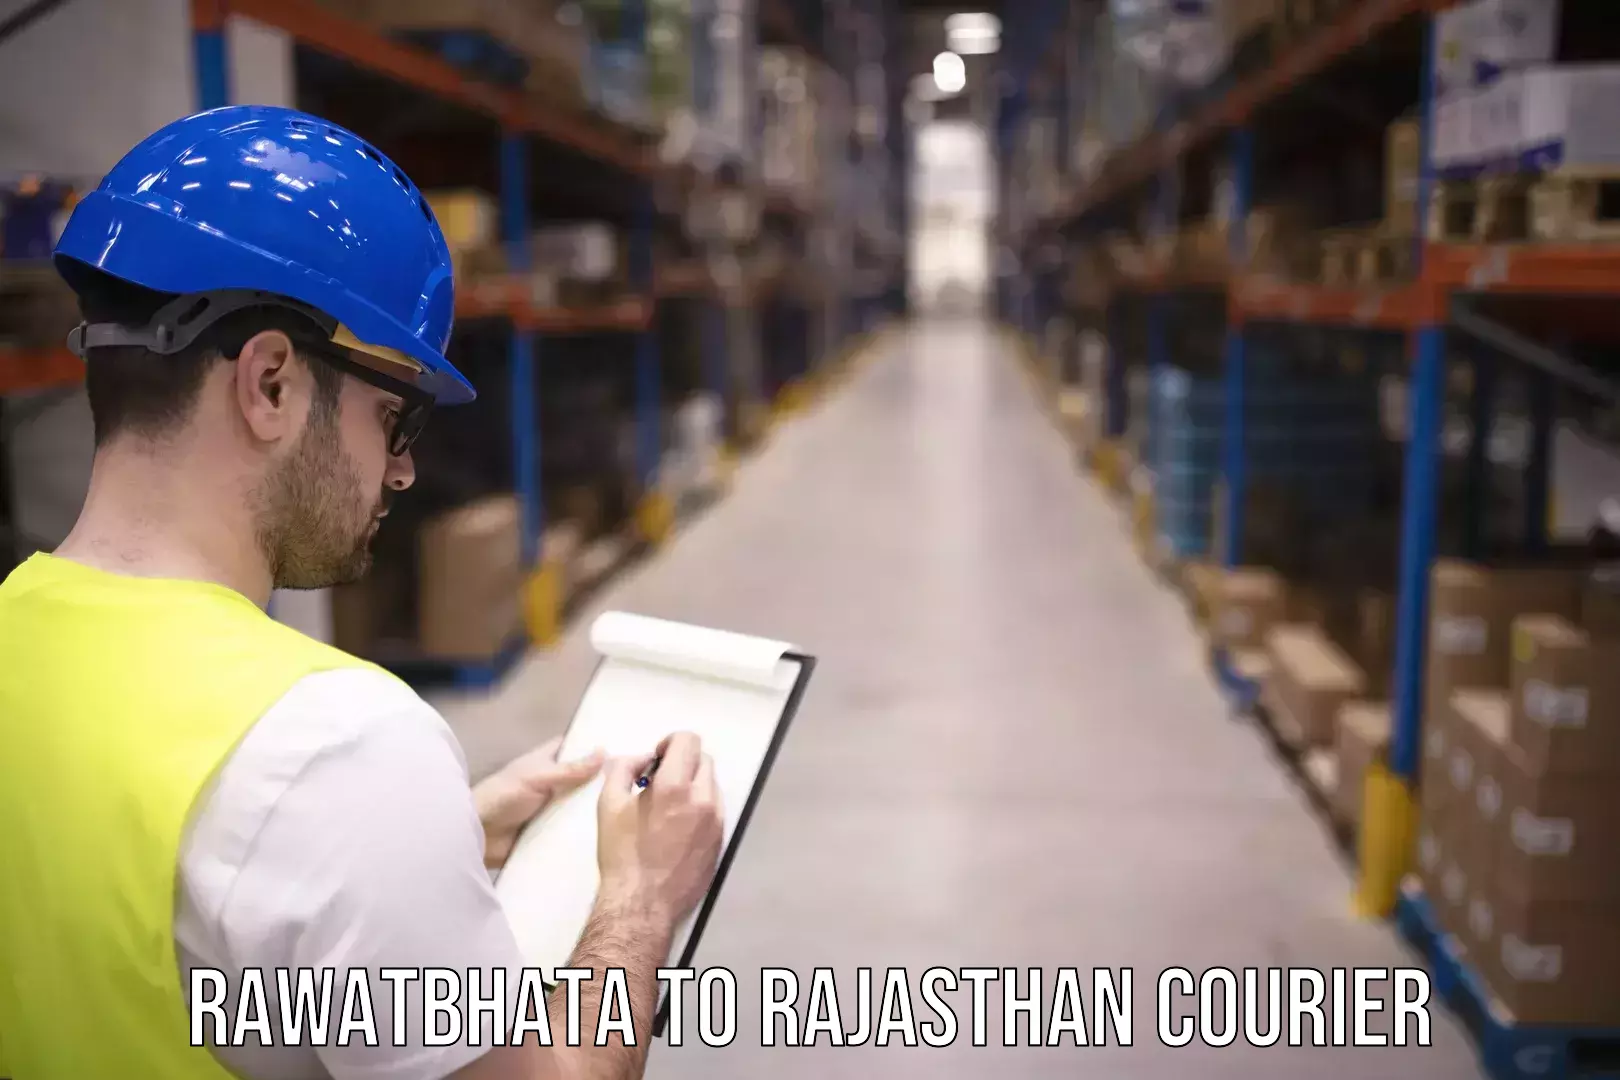 Customer-focused courier Rawatbhata to Rajasthan